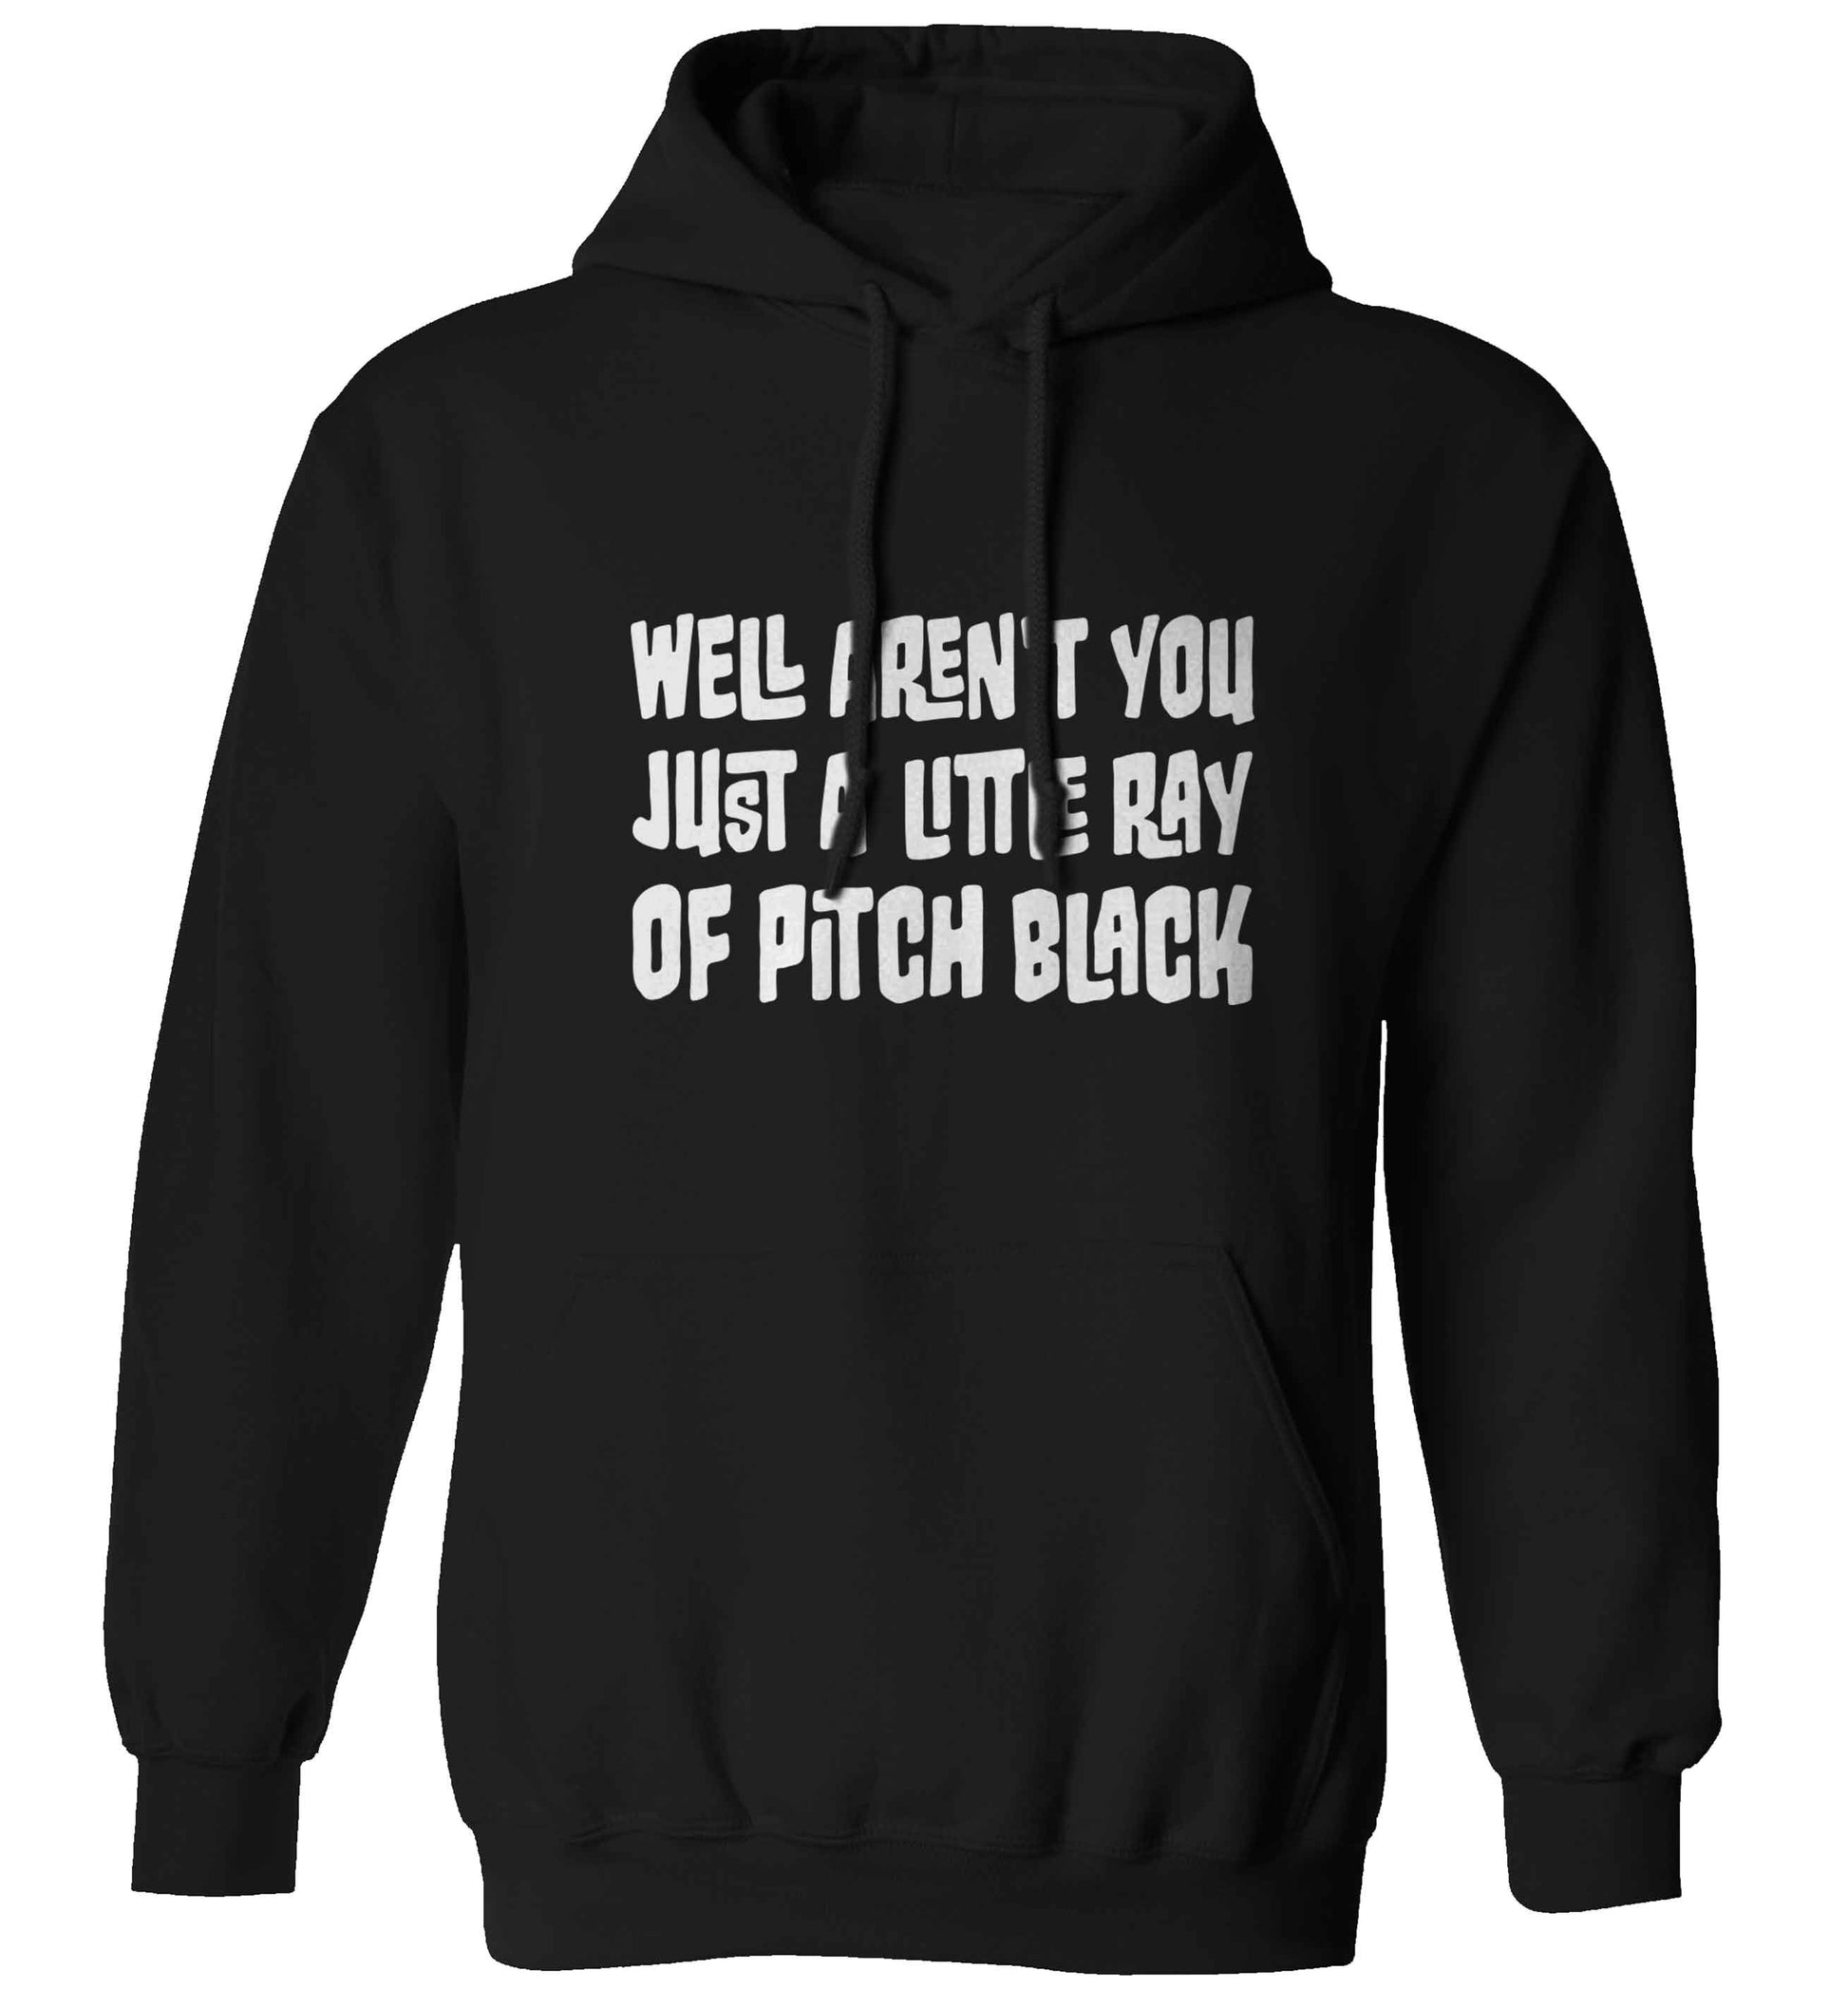 Well aren't you just a little ray of pitch black Kit adults unisex black hoodie 2XL